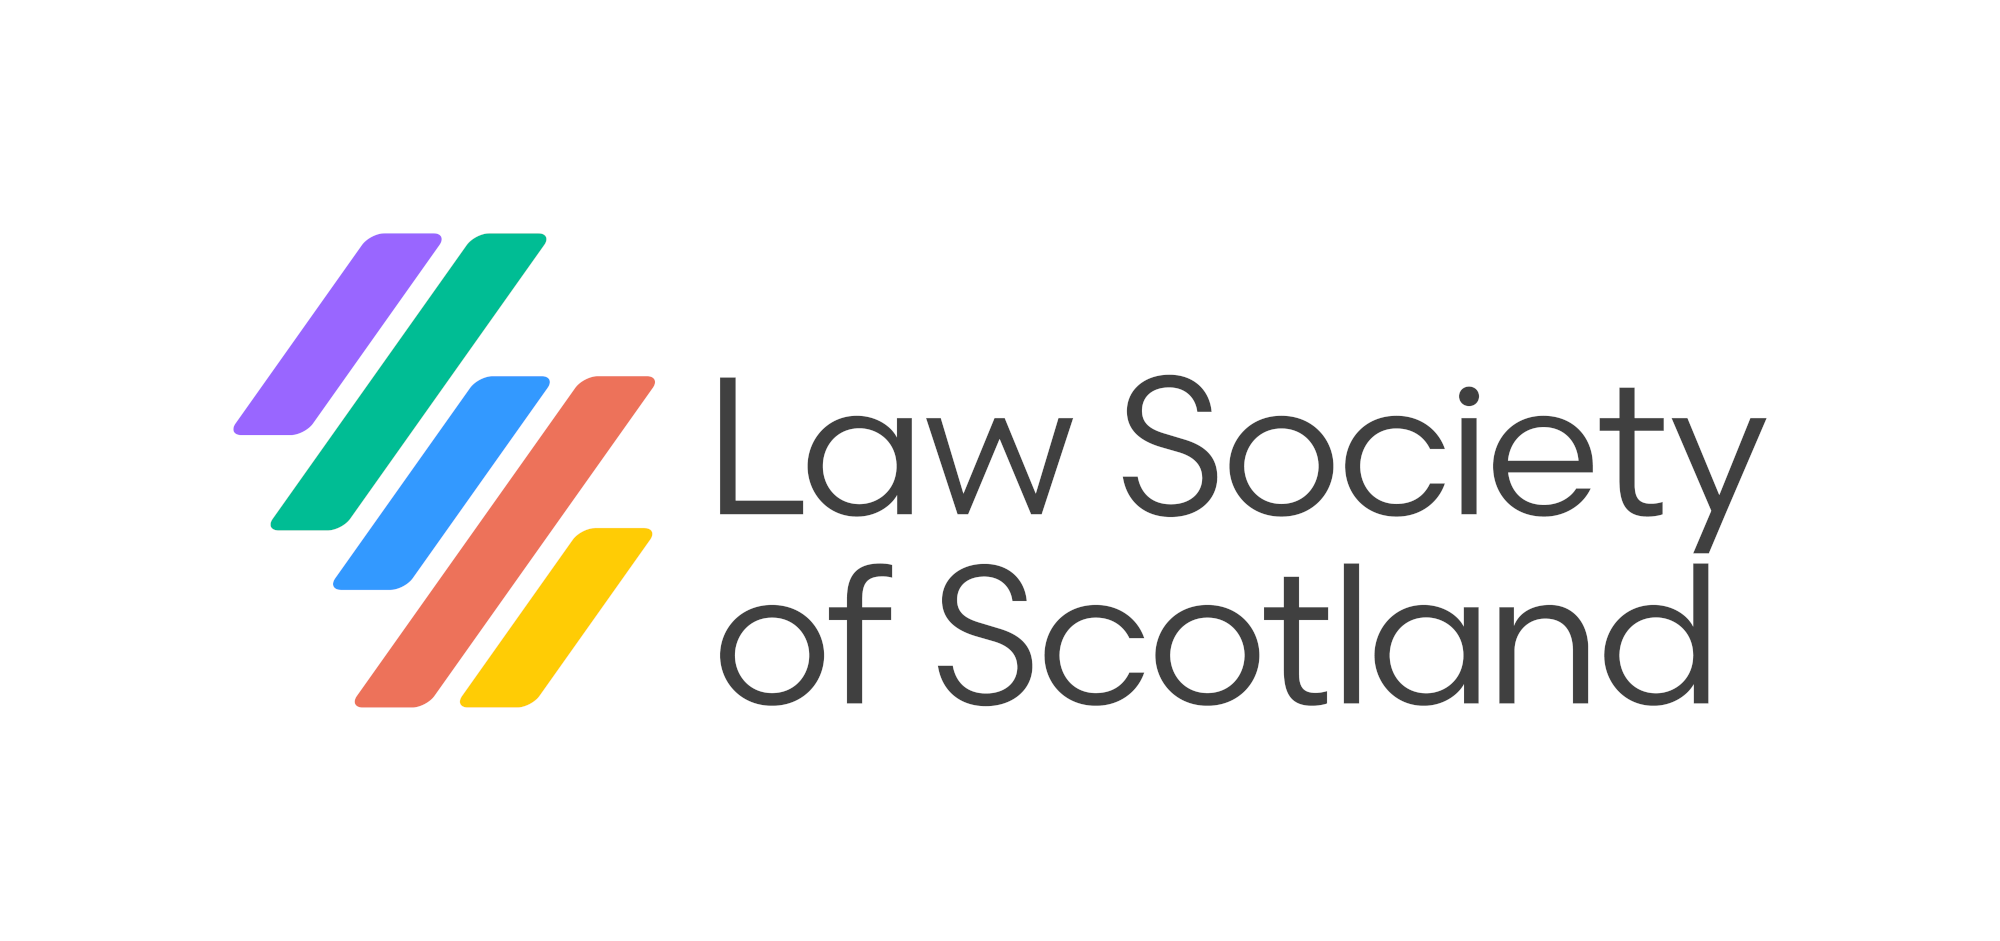 Law Society: Judicial factors reform a step forward but refinement needed